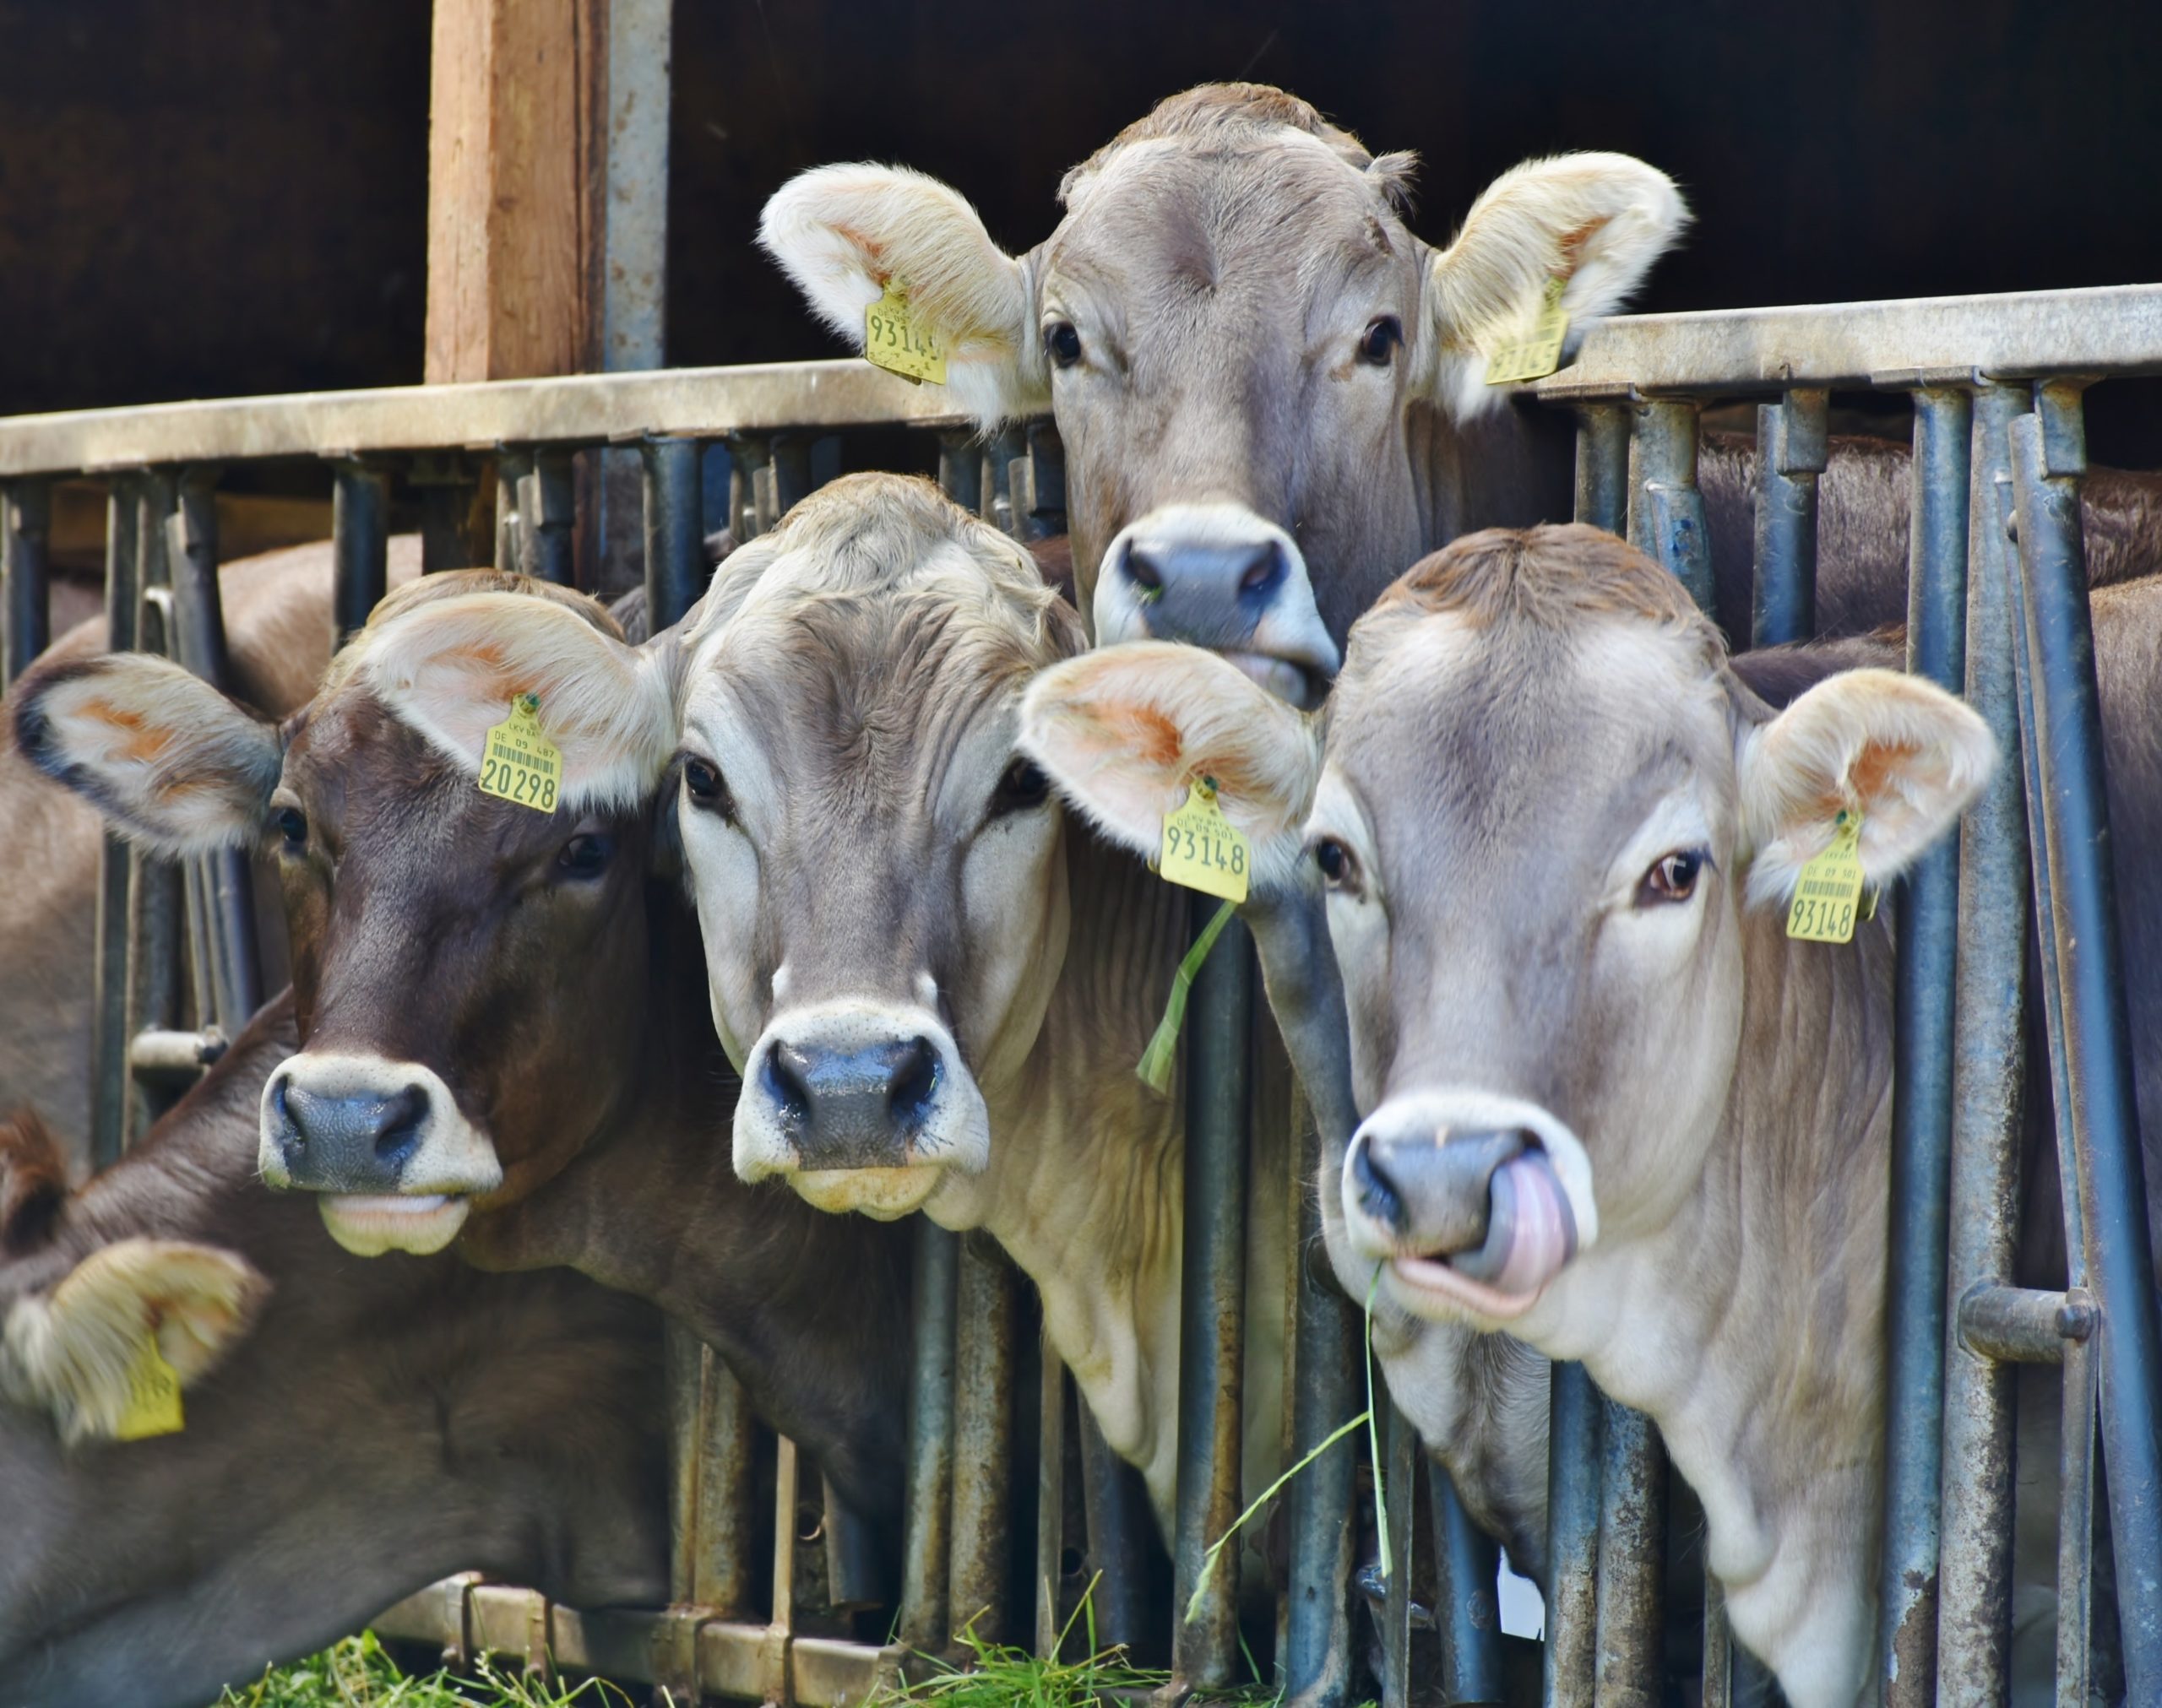 A group of healthy and alert Jersey cattle staring attentively at the viewer while in a head gates eating bright green fodder.